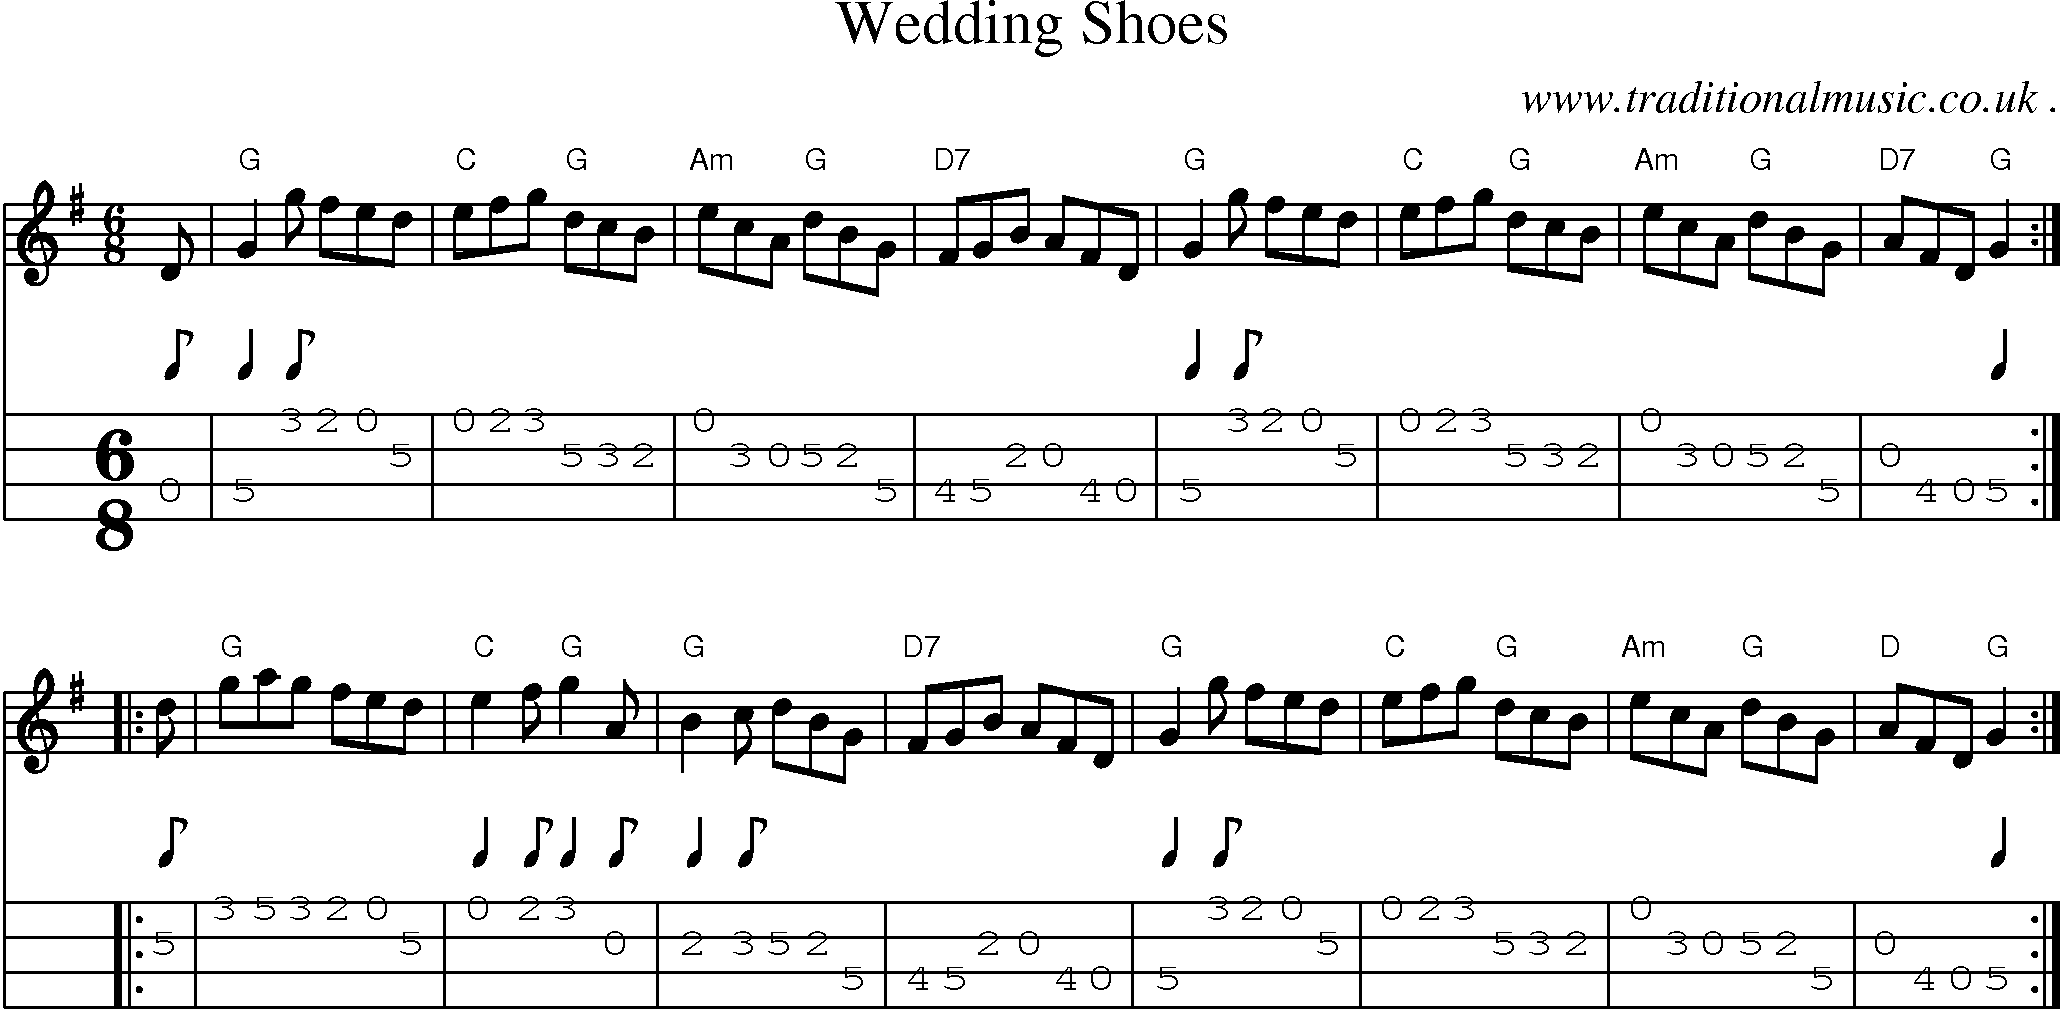 Sheet-music  score, Chords and Mandolin Tabs for Wedding Shoes